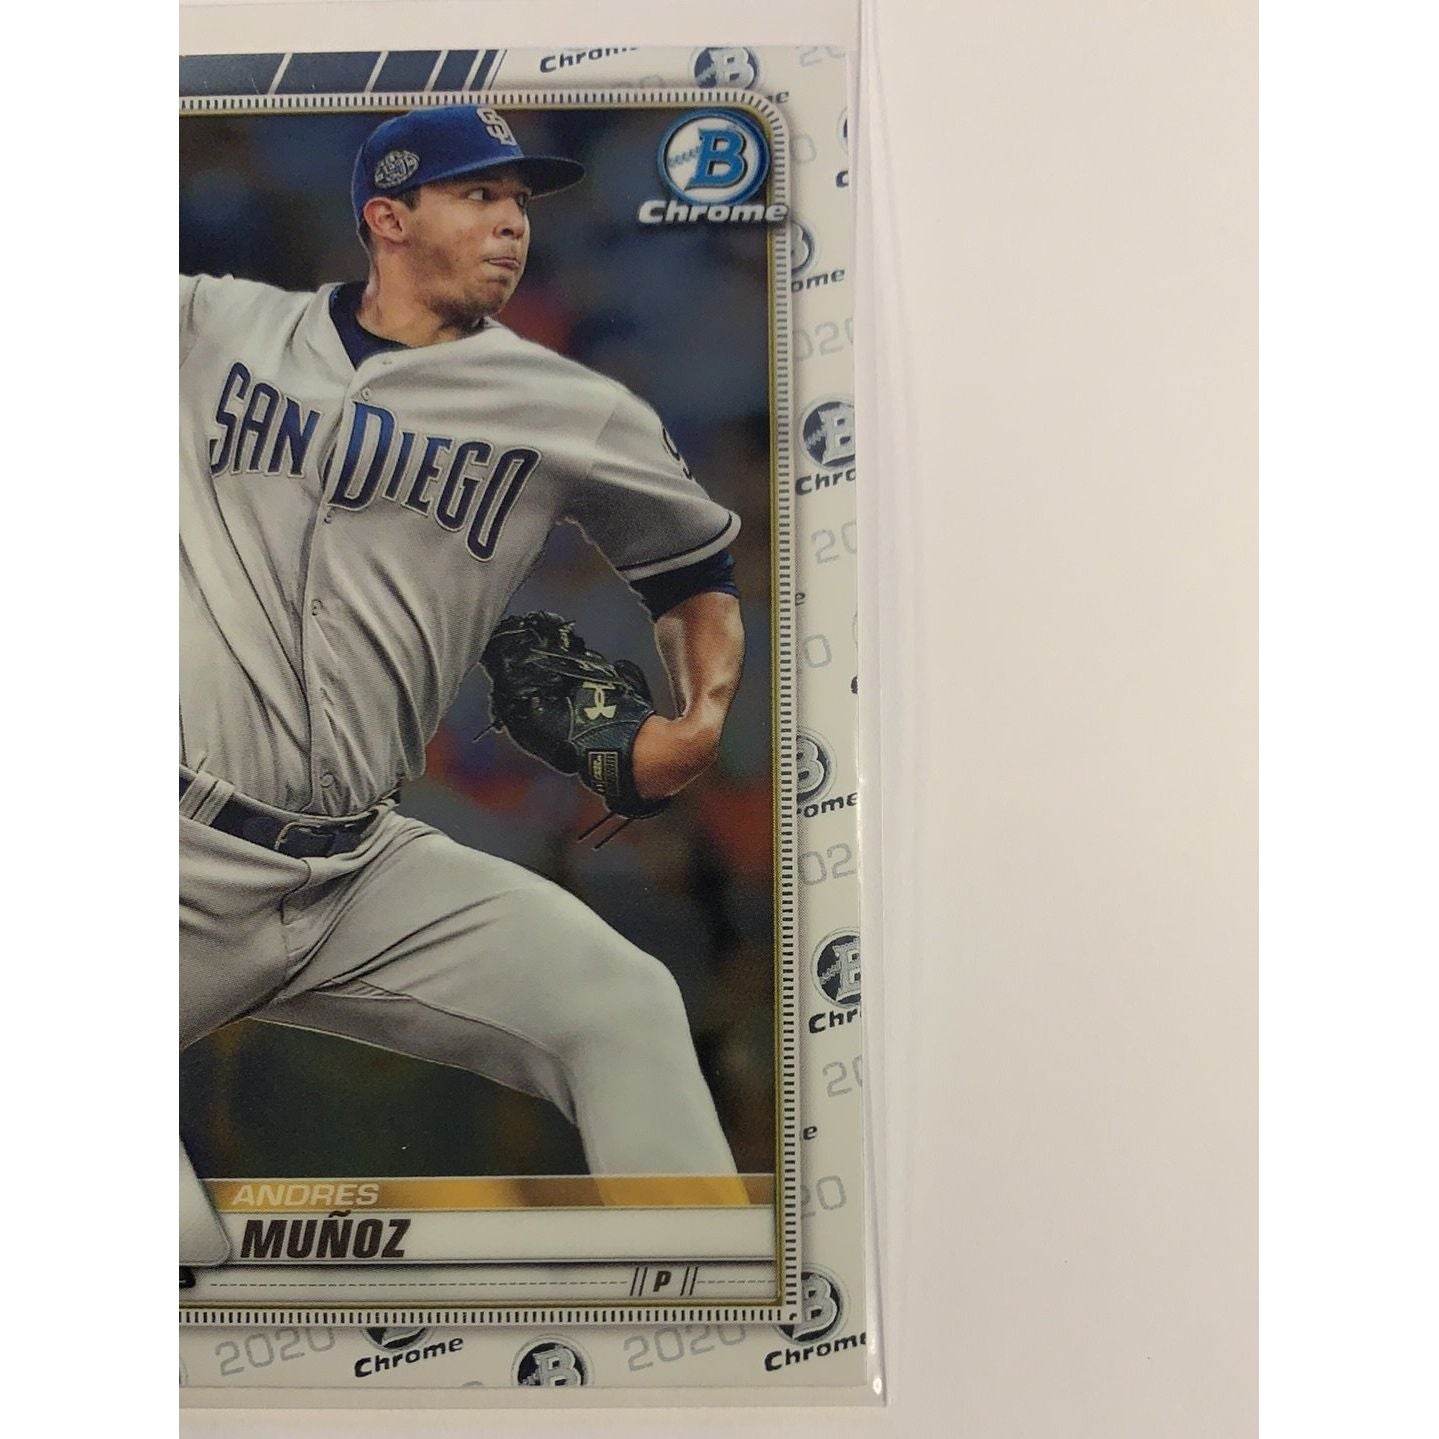  2020 Bowman Chrome Andres Munoz RC  Local Legends Cards & Collectibles